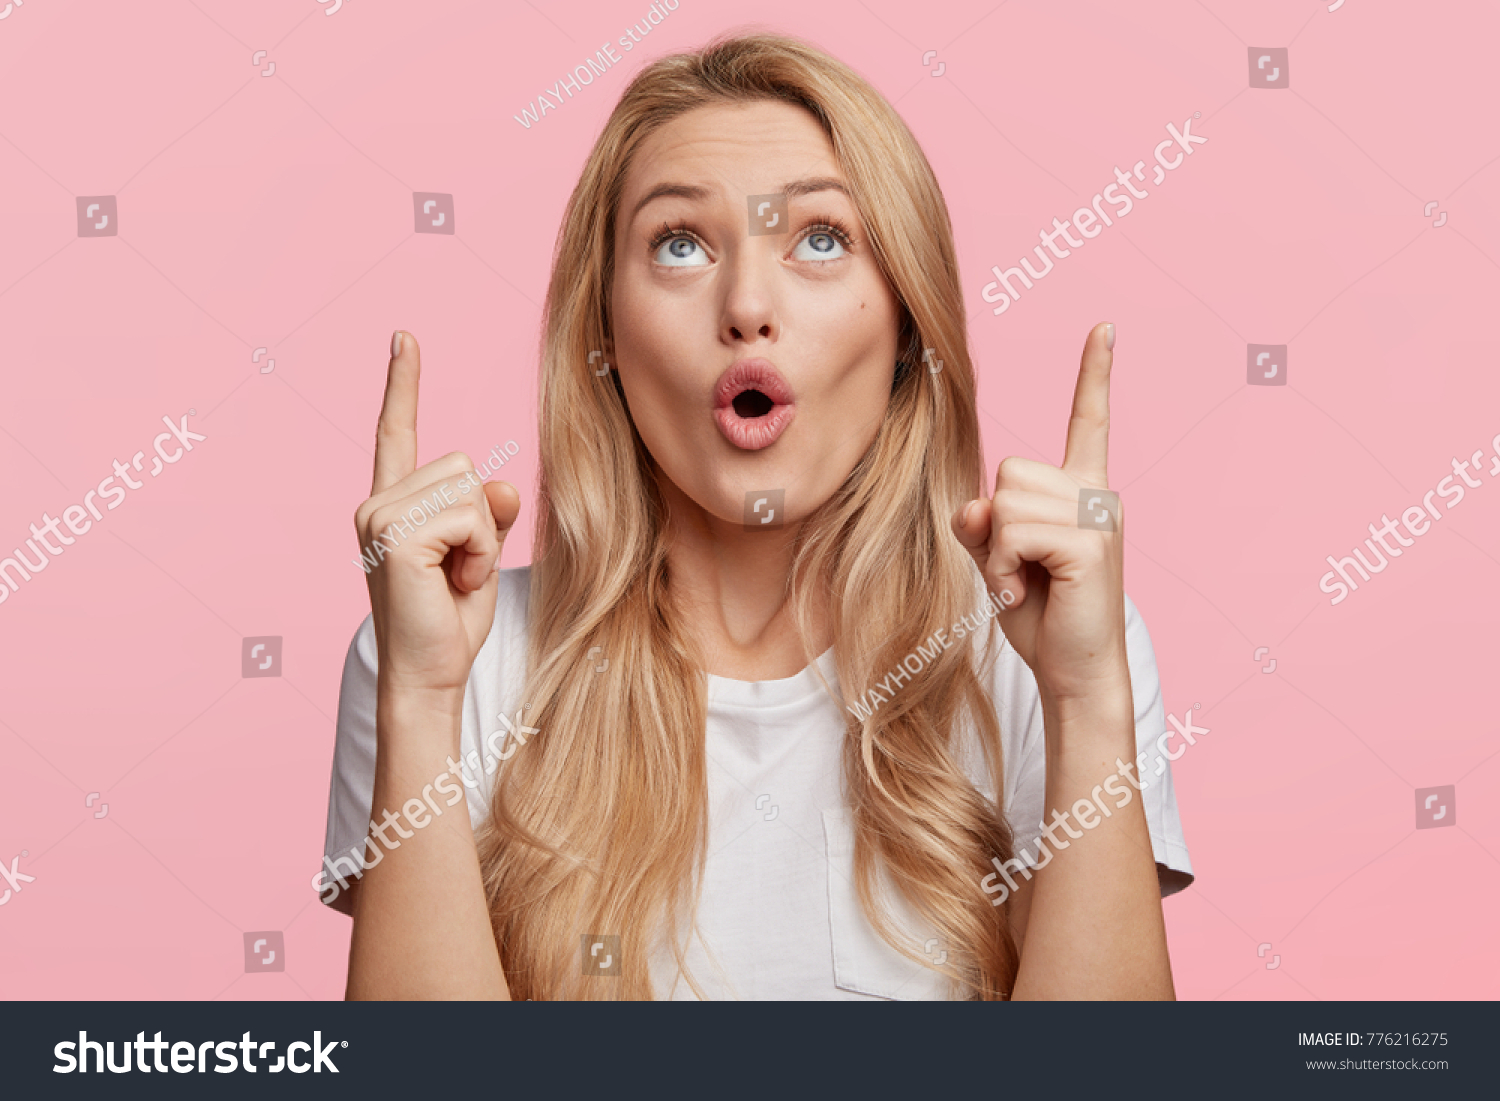 Good looking blonde female with pure healthy skin looks in amazement as indicates at something upwards, isolated over pink background. Pretty young woman sees amazing thing up, gestures indoor #776216275